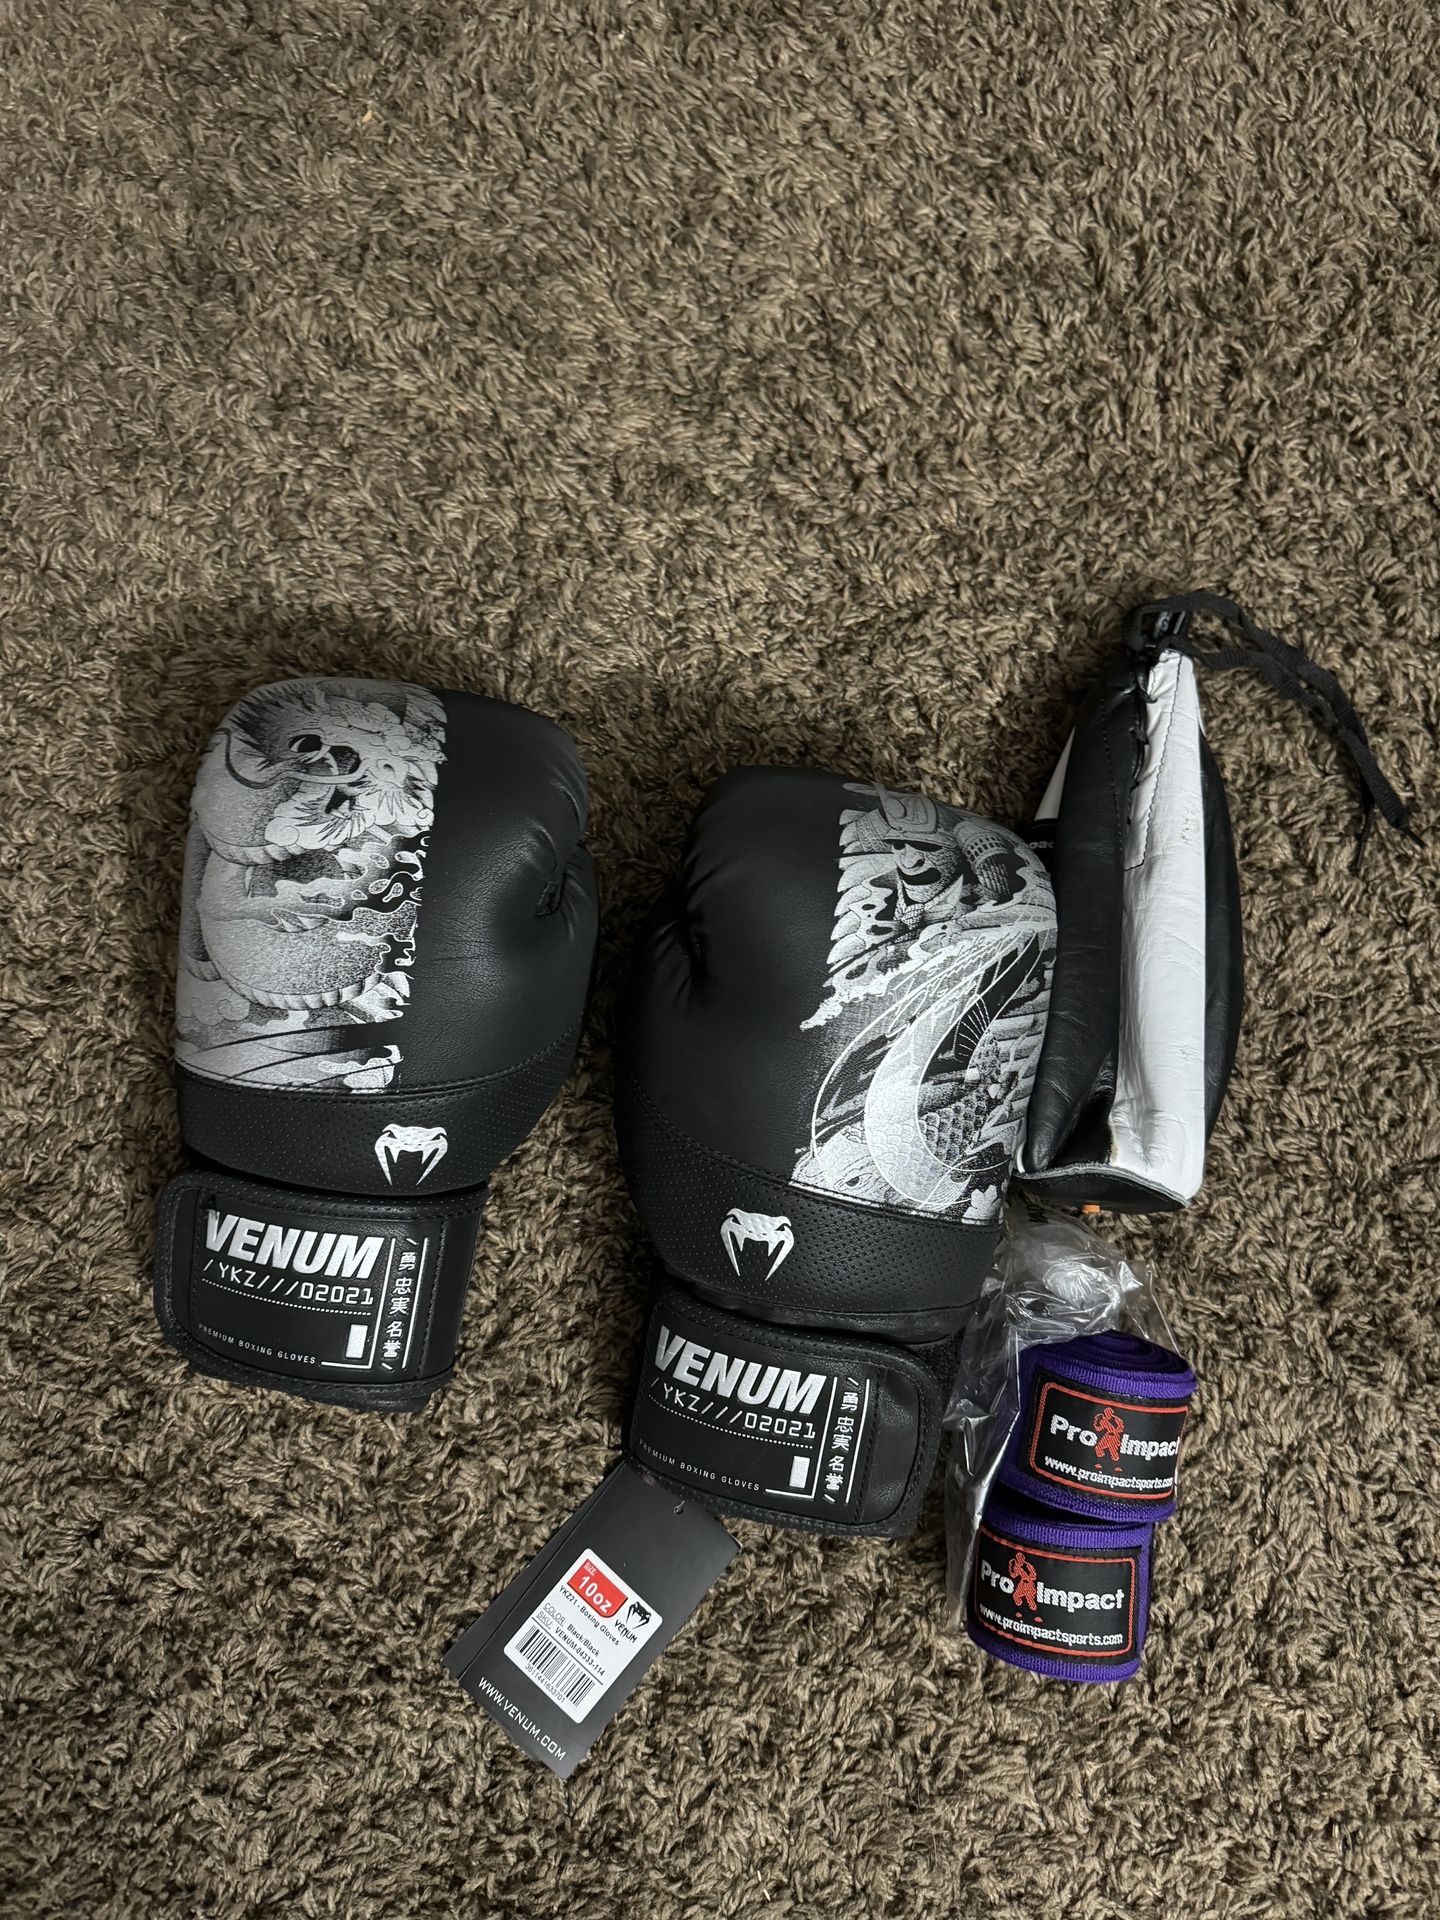 Venum 10 Oz Boxing Gloves Hand Wraps And Speed Bag